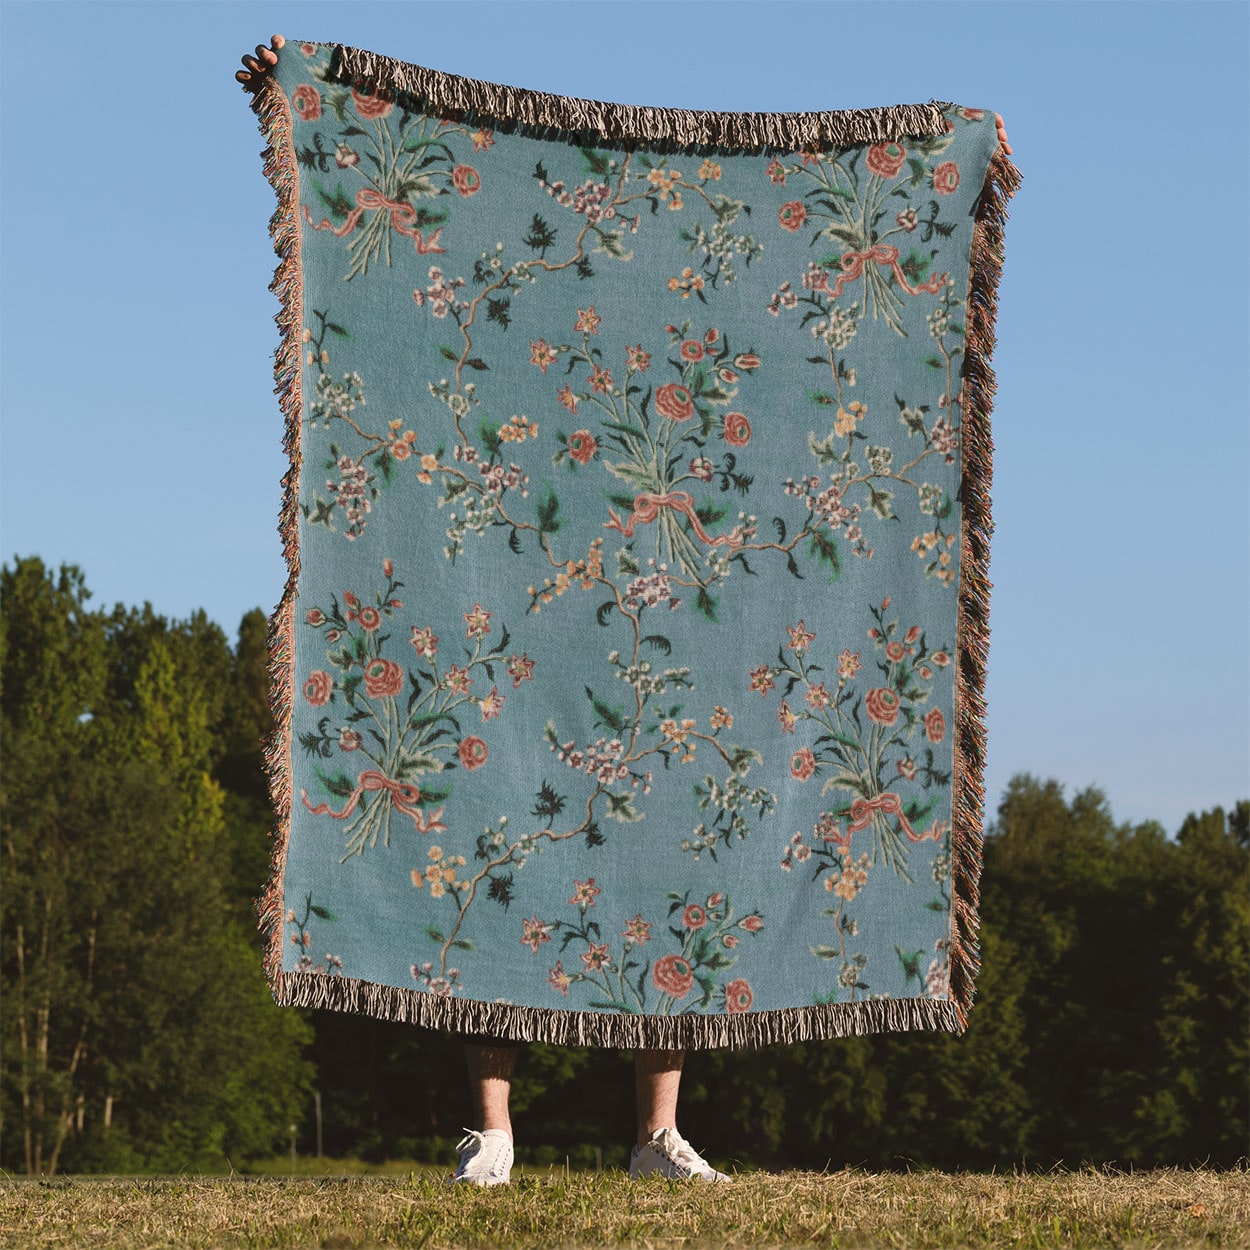 Light Floral Woven Blanket Held on a Woman's Back Outside